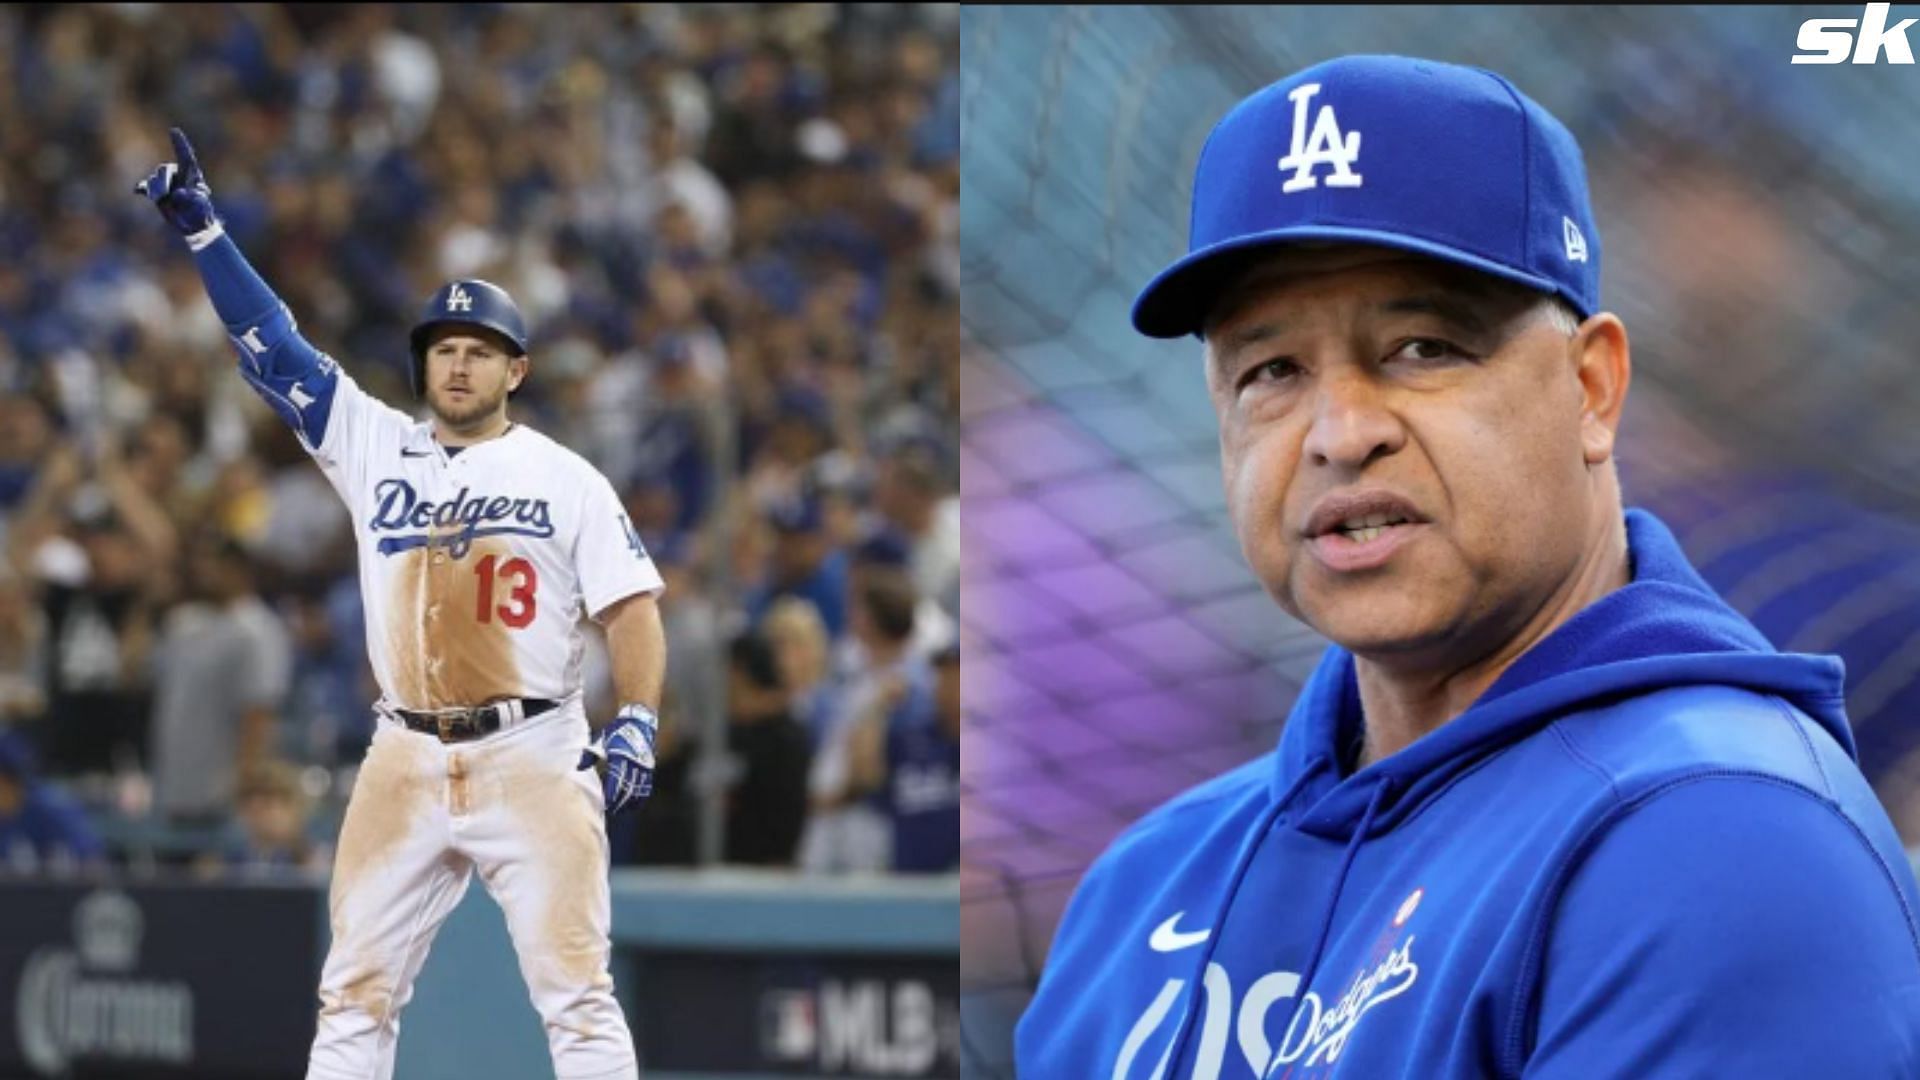 Max Muncy, a batter for the Los Angeles Dodgers, and manager Dave Roberts